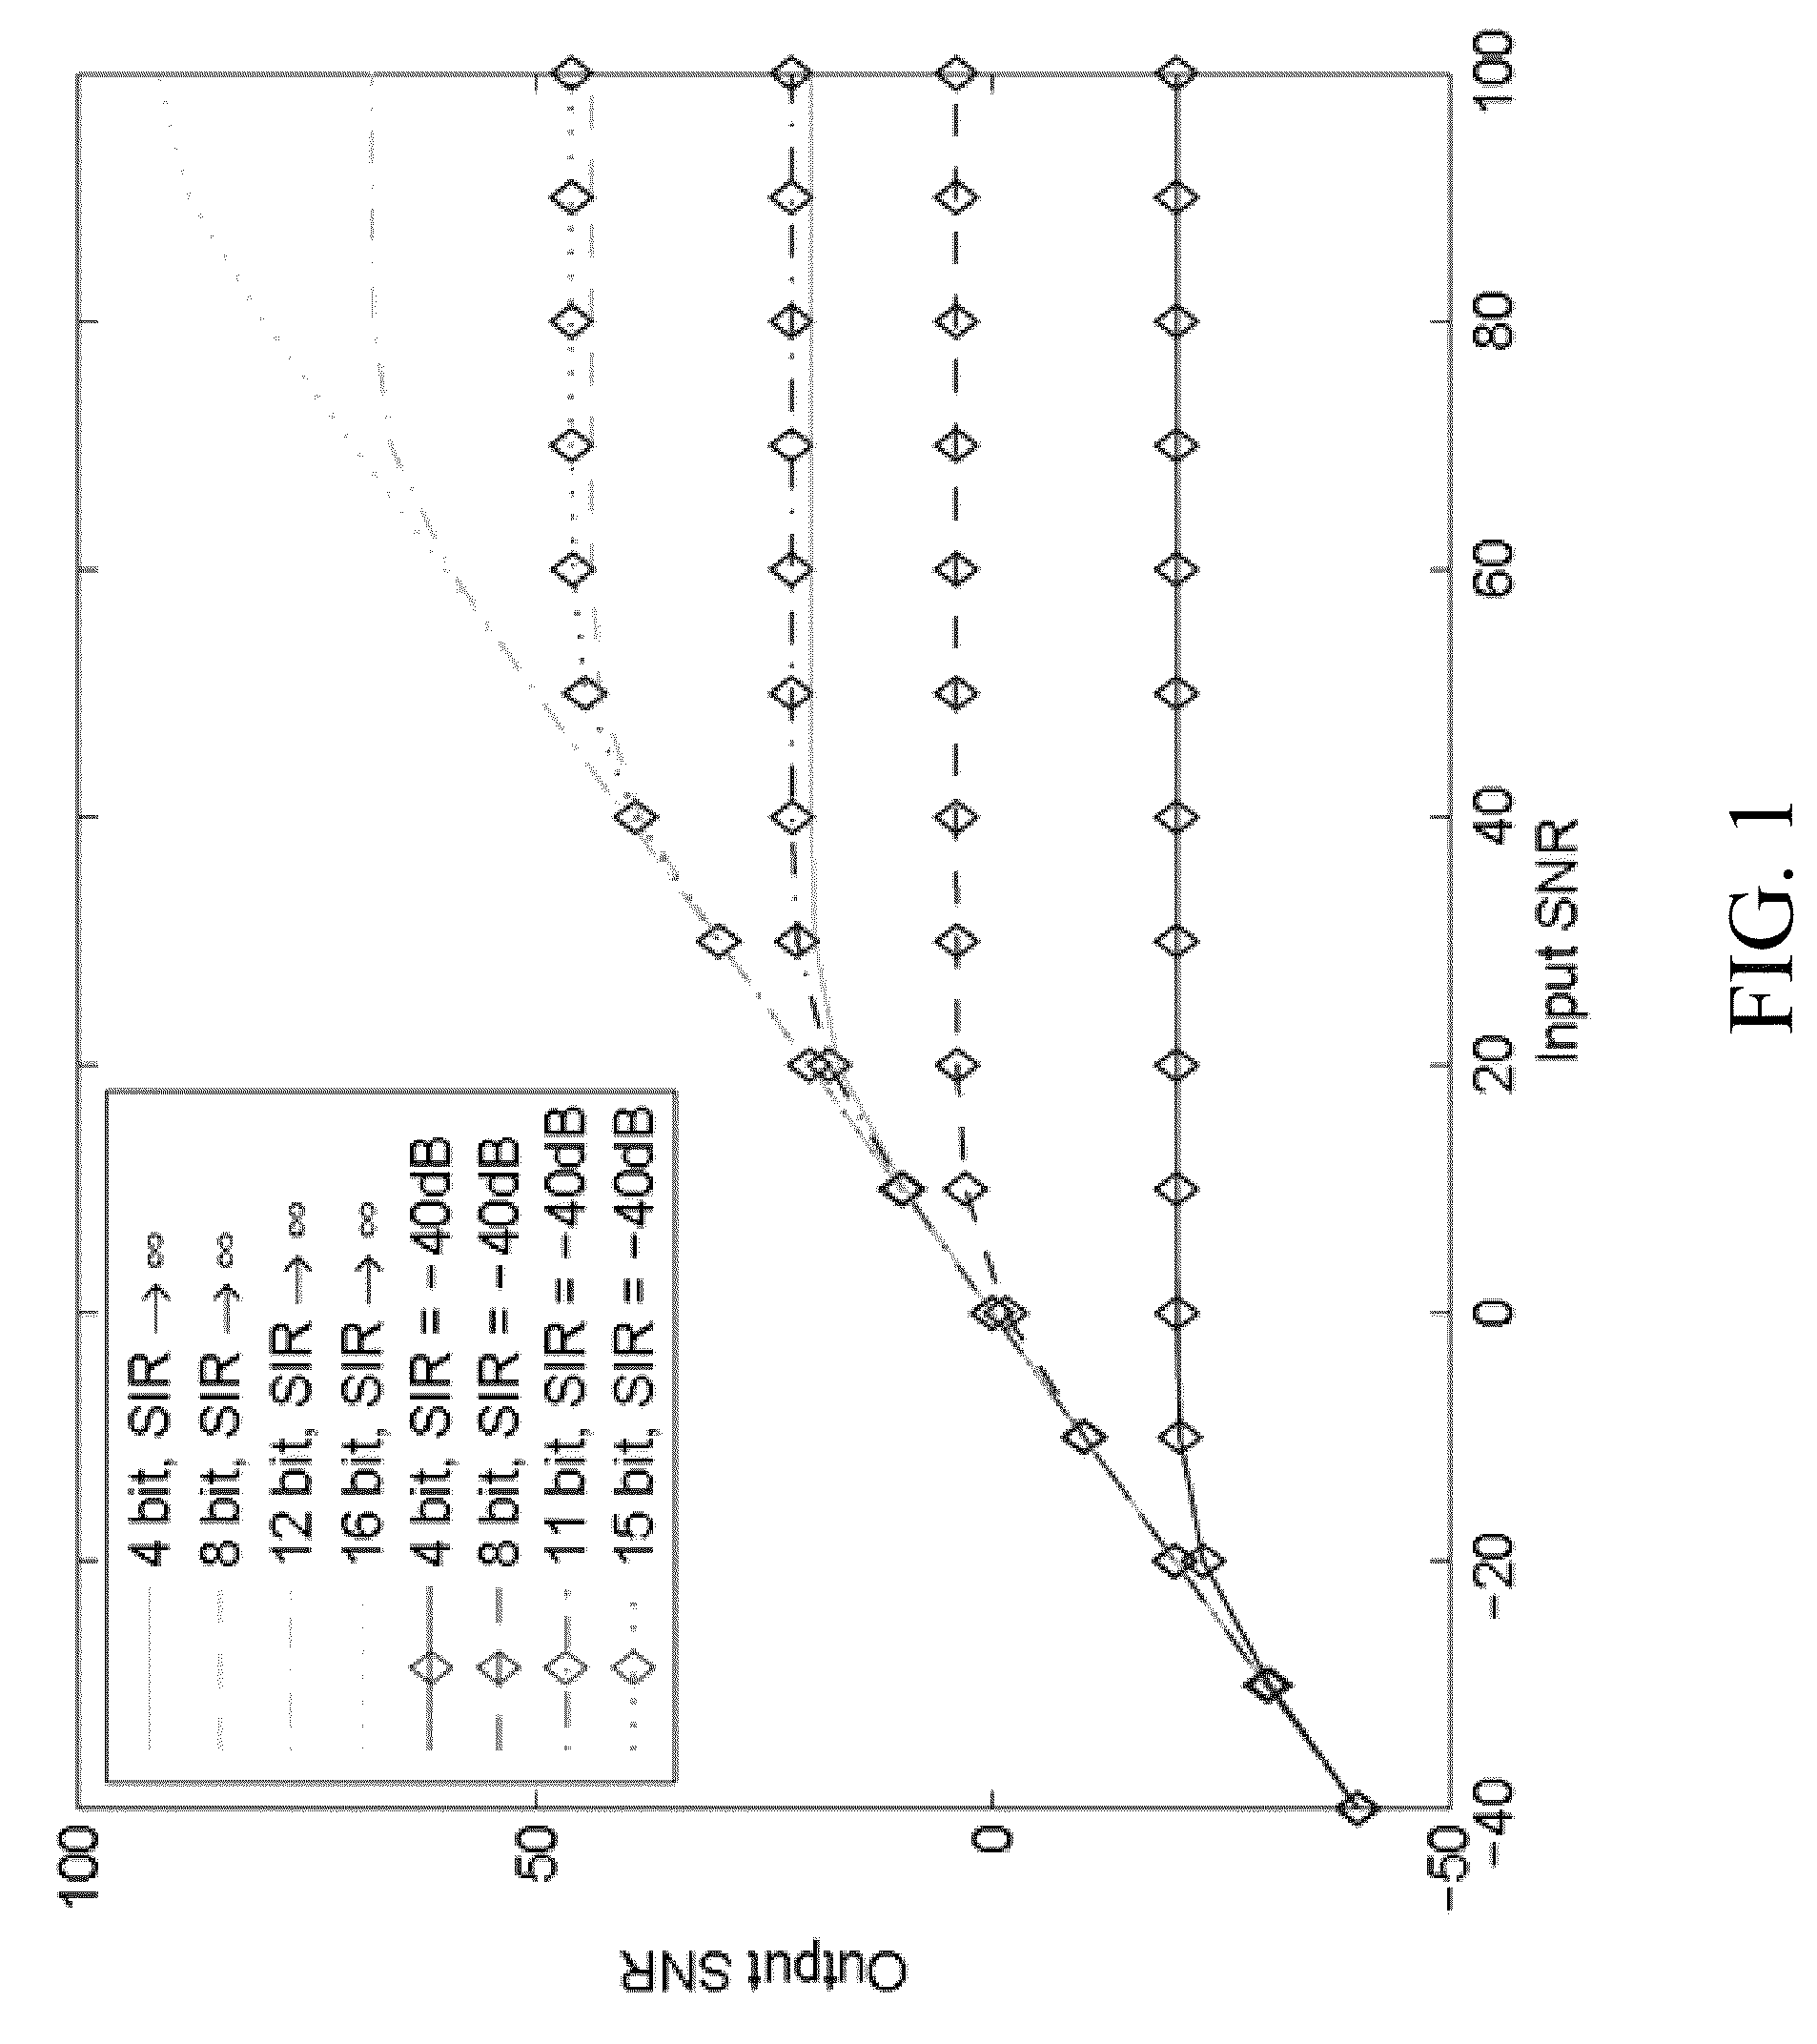 Interference cancellation for full-duplex communications